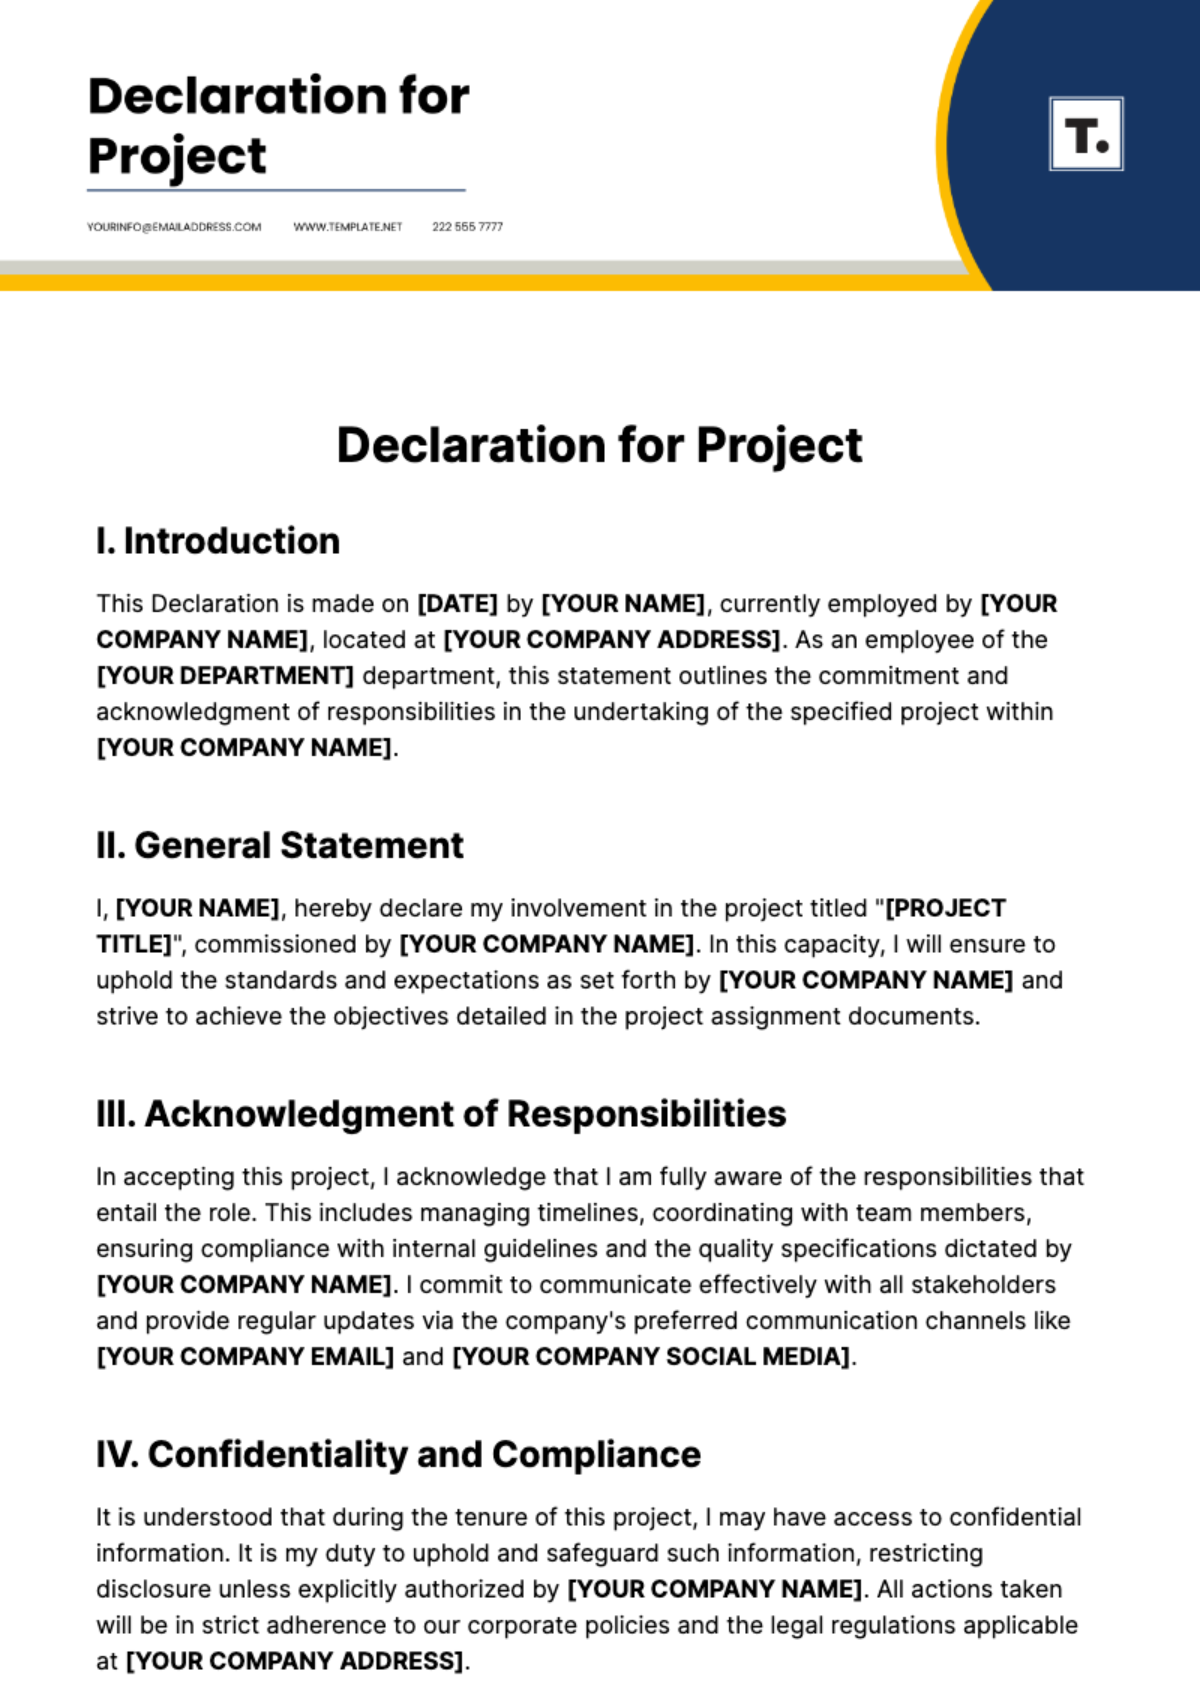 Declaration for Project Template